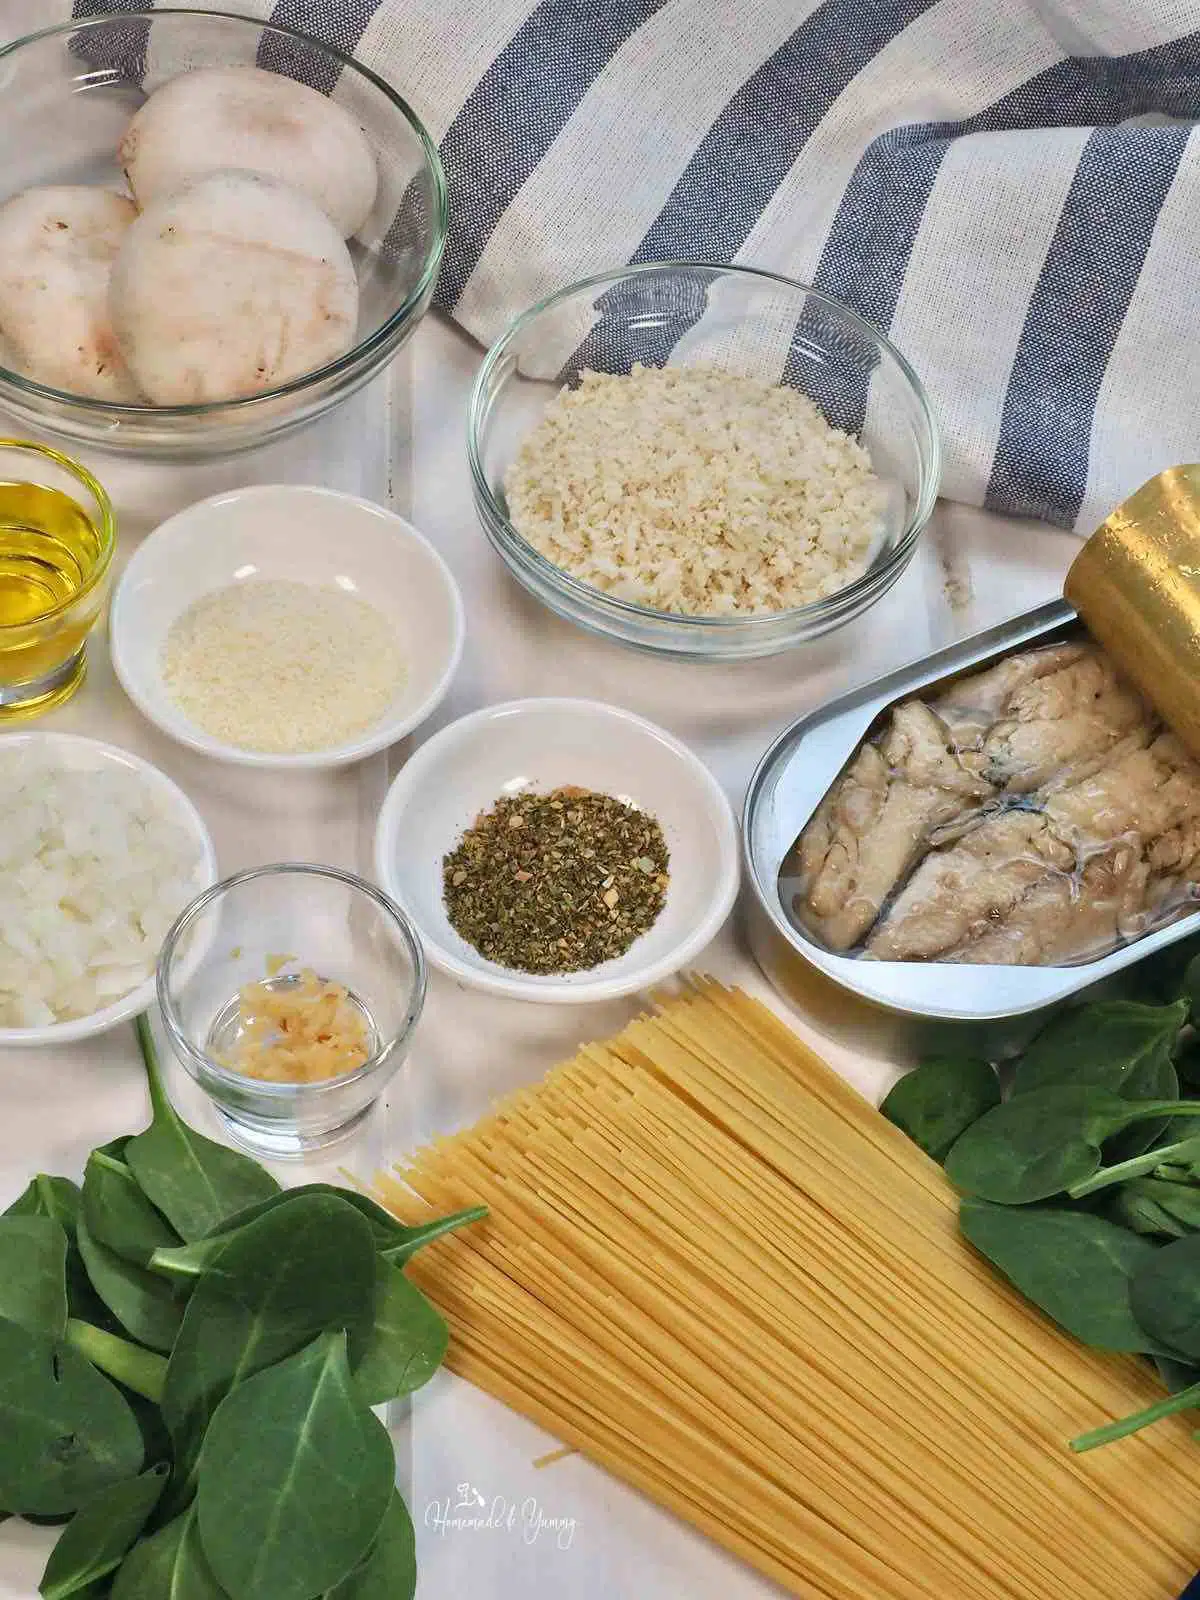 Ingredients to make spaghetti with sardines, mushrooms and spinach.